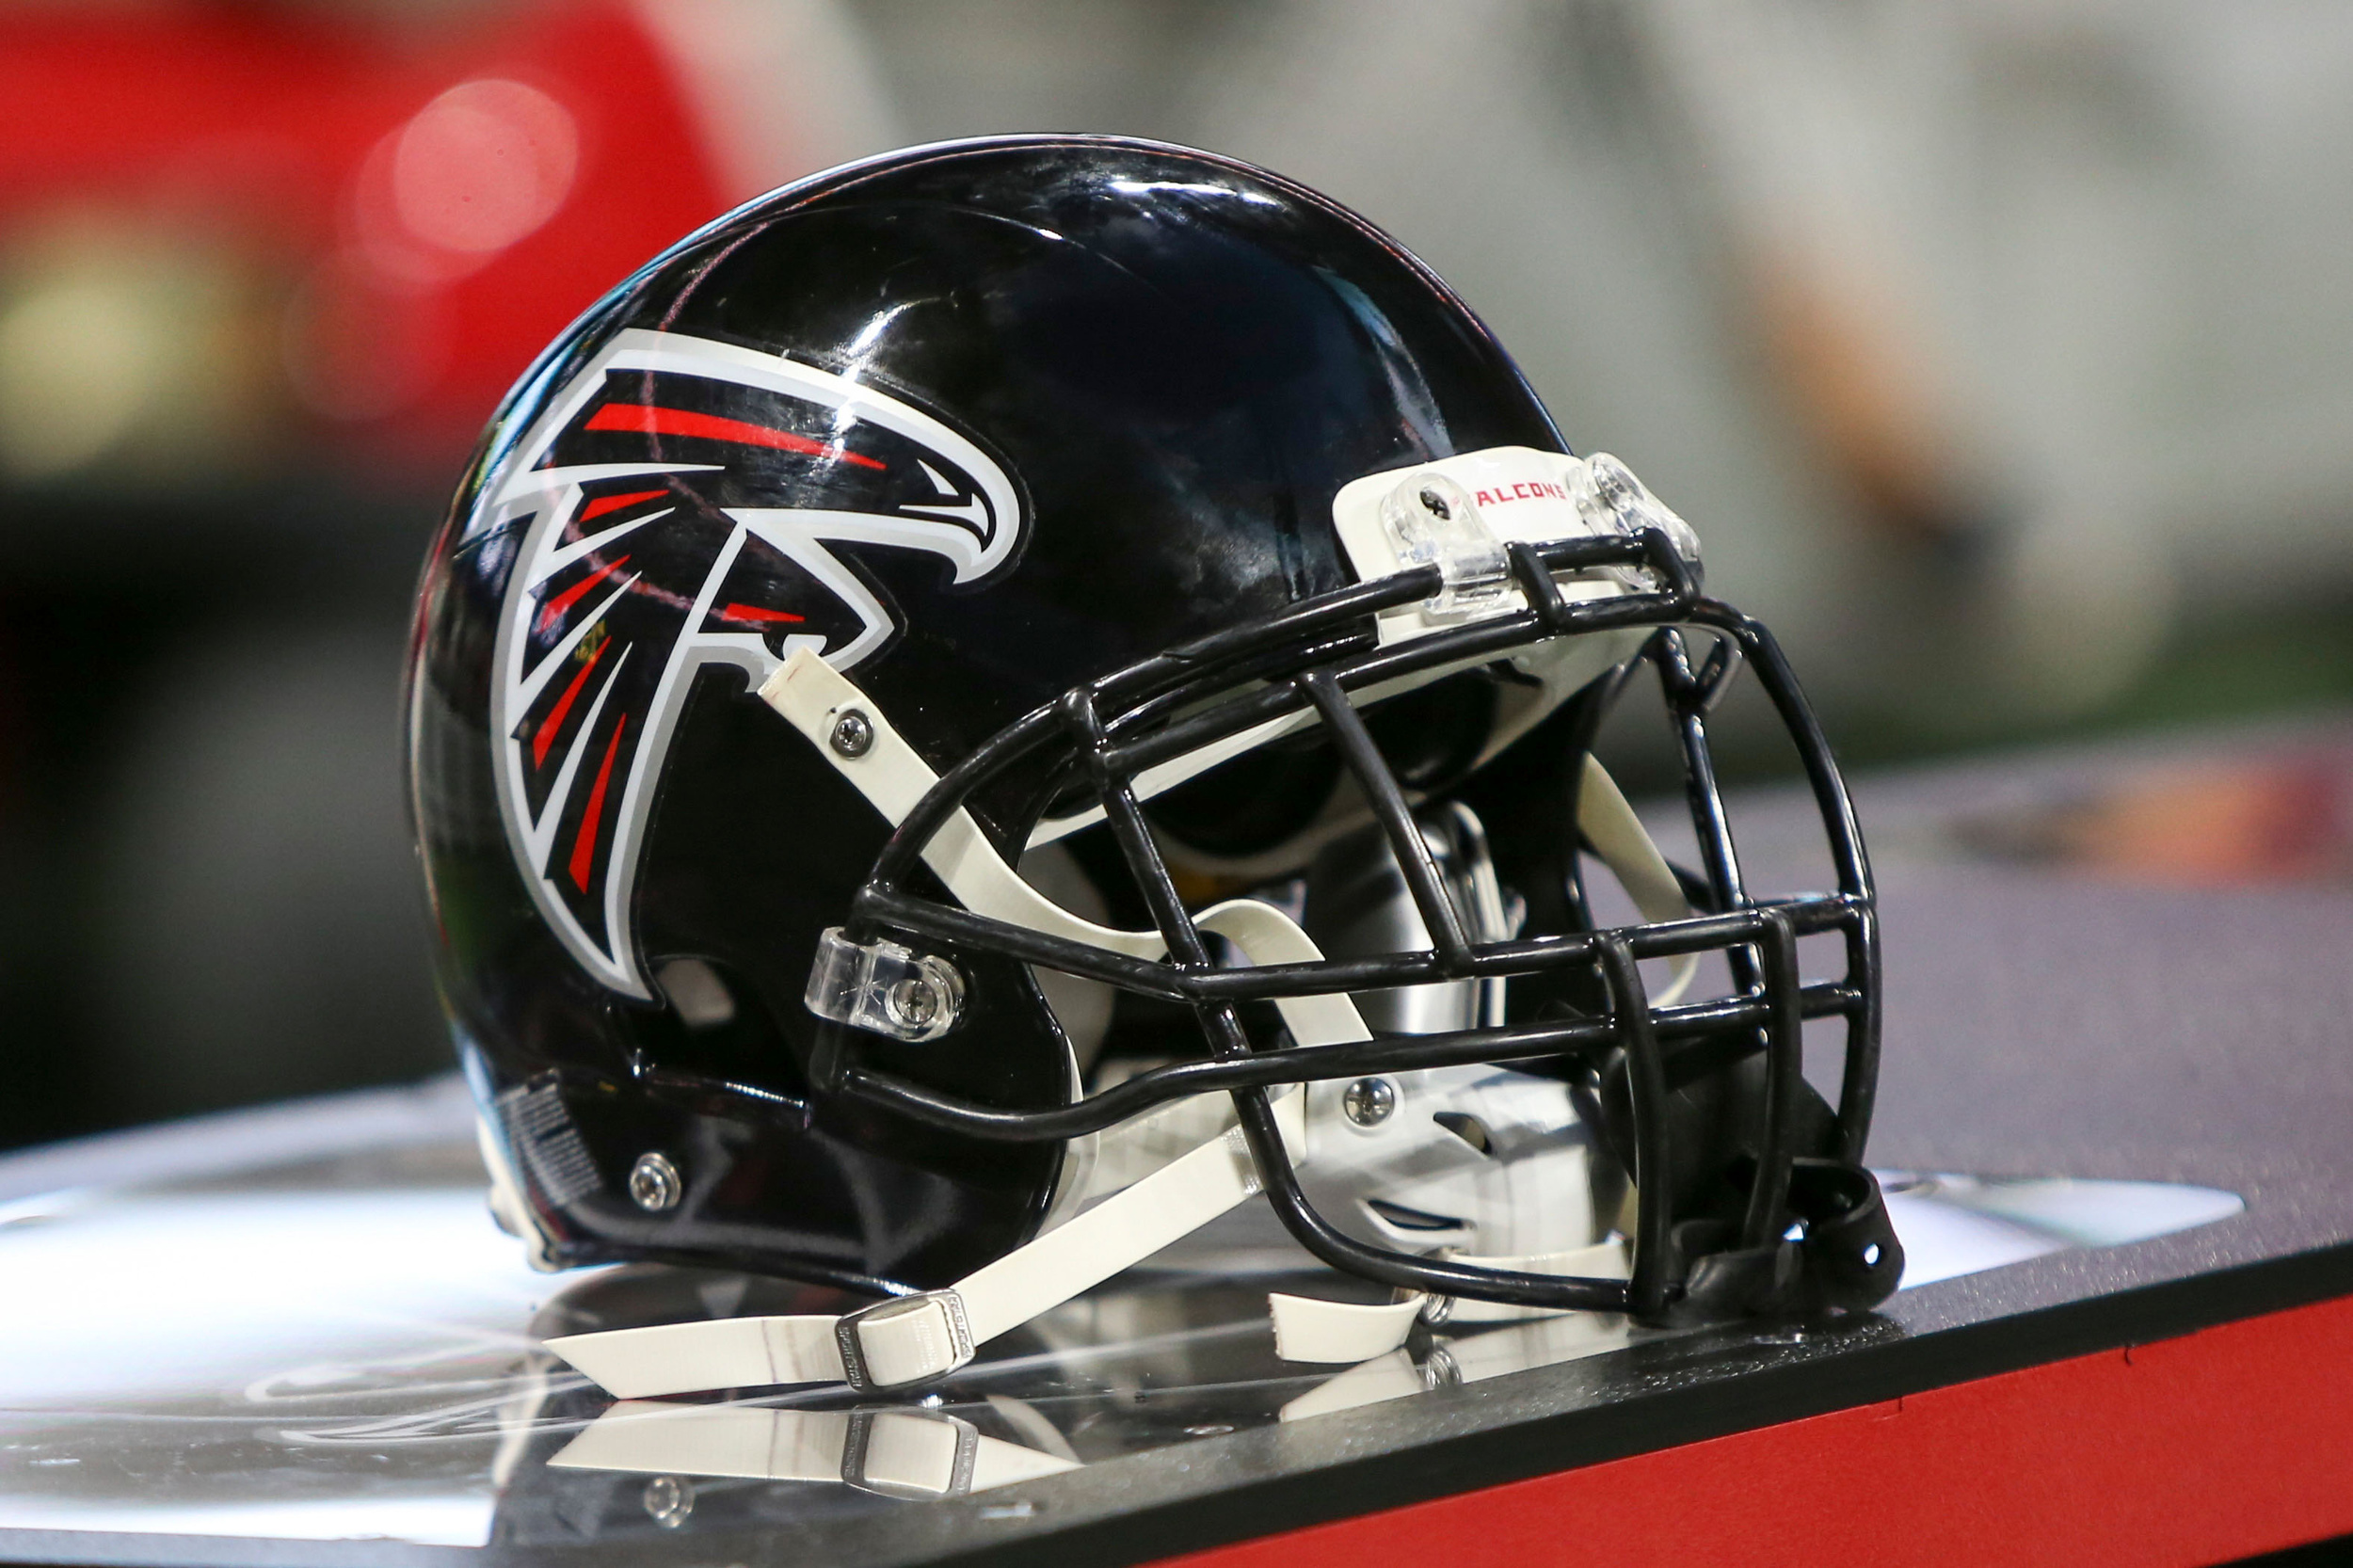 falcons expected to receive the worst of nfl’s tampering punishment